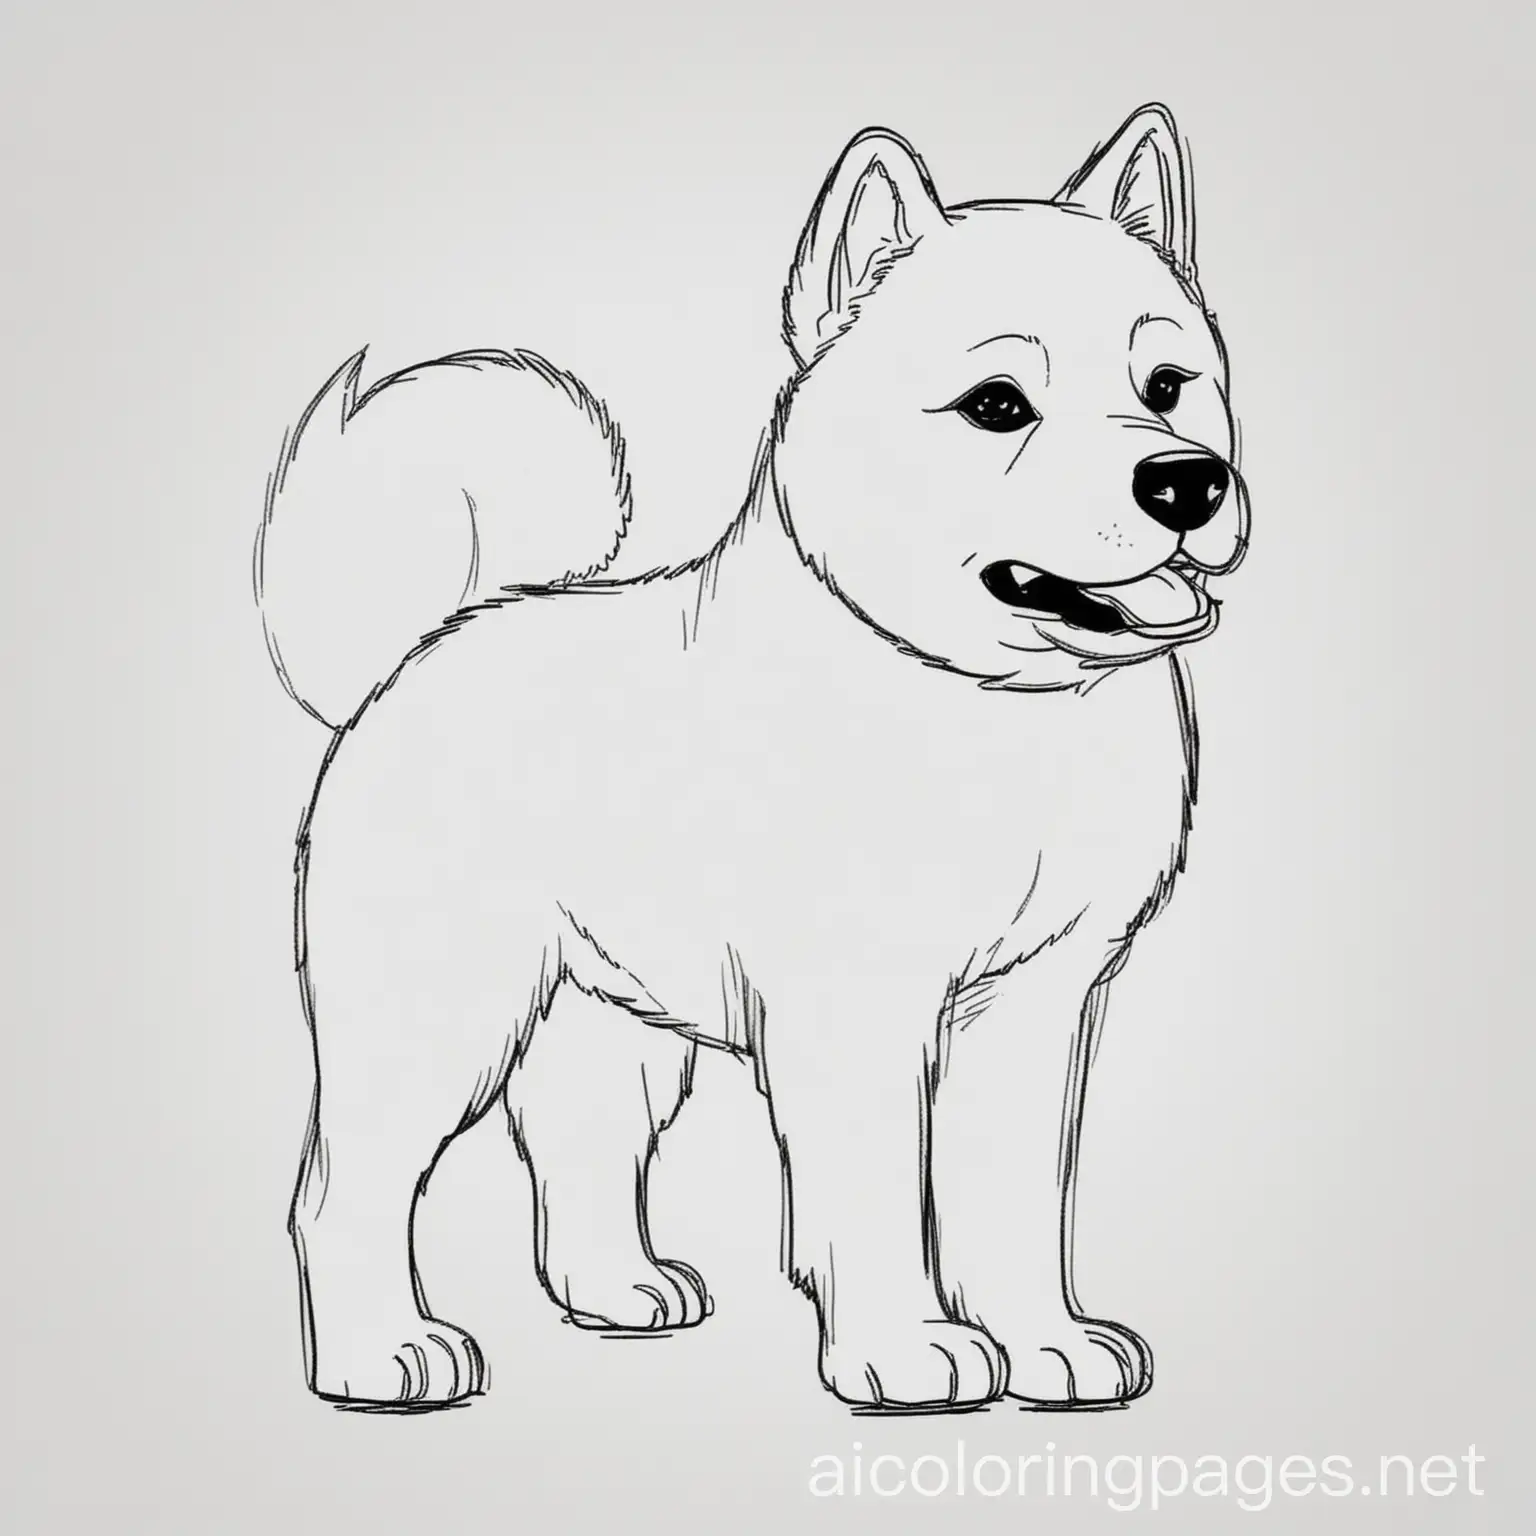 akita dog
, Coloring Page, black and white, line art, white background, Simplicity, Ample White Space. The background of the coloring page is plain white to make it easy for young children to color within the lines. The outlines of all the subjects are easy to distinguish, making it simple for kids to color without too much difficulty